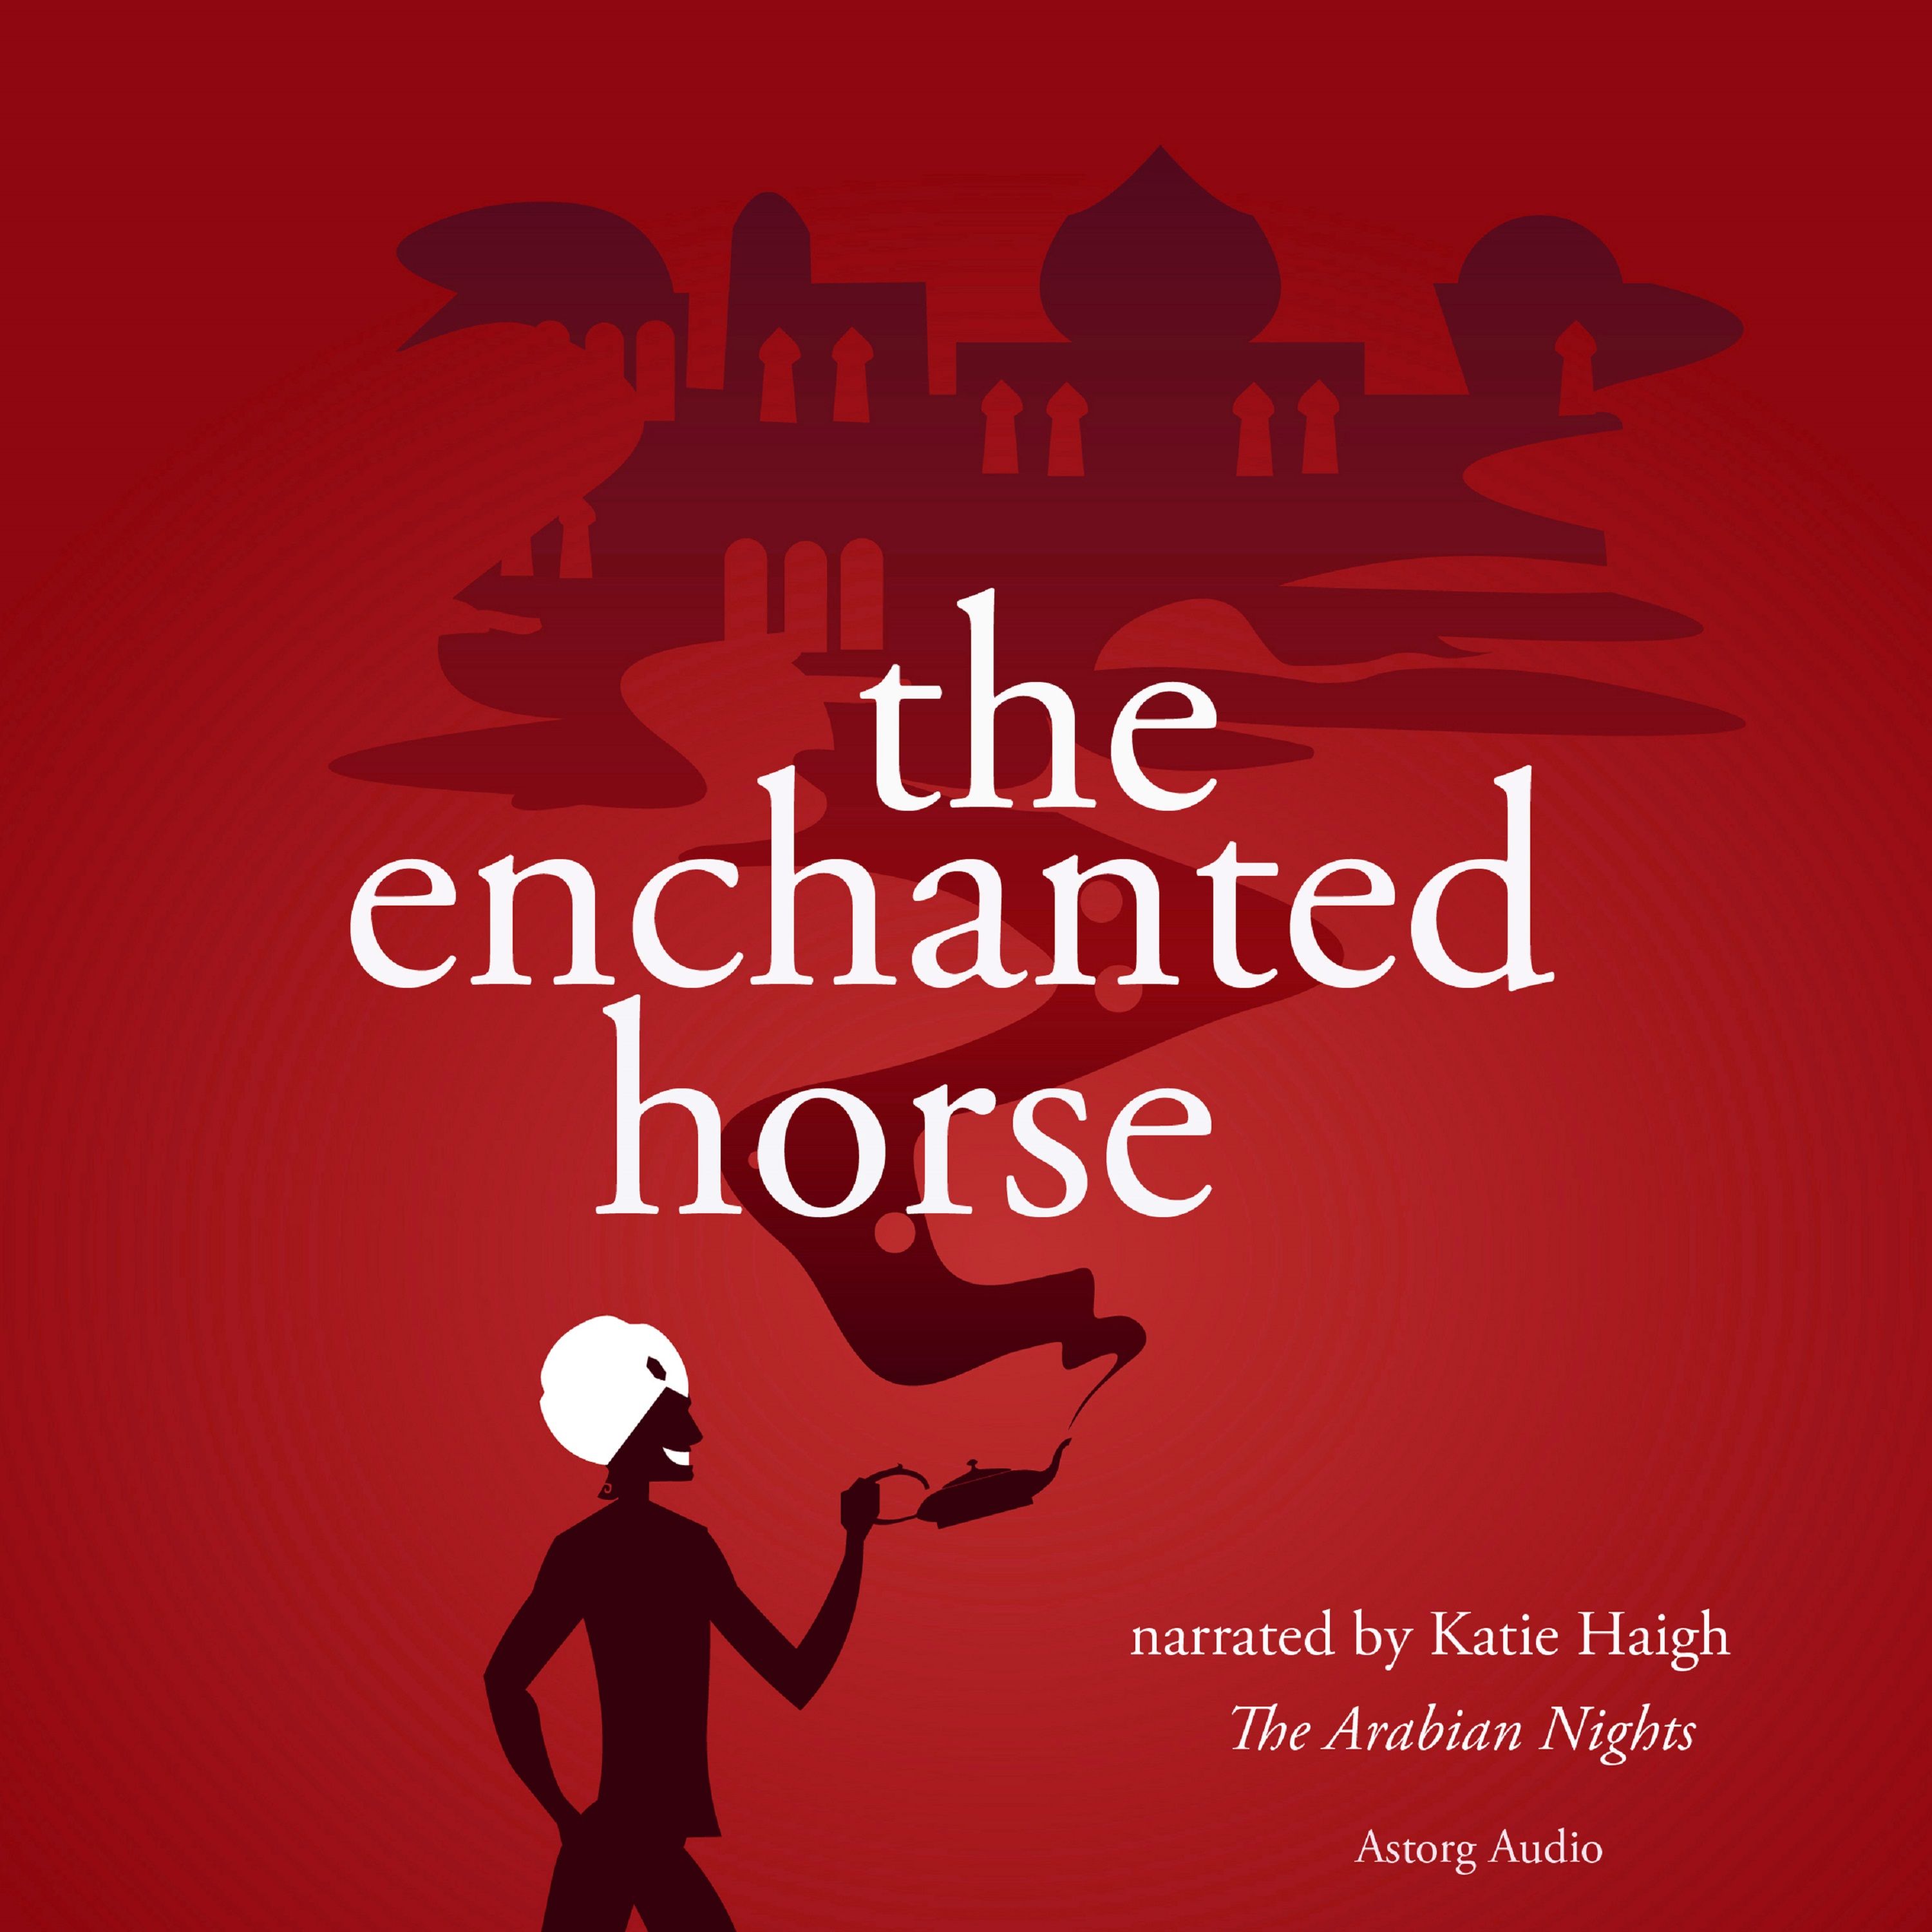 The Enchanted Horse, a 1001 Nights Fairy Tale, audiobook by The Arabian Nights